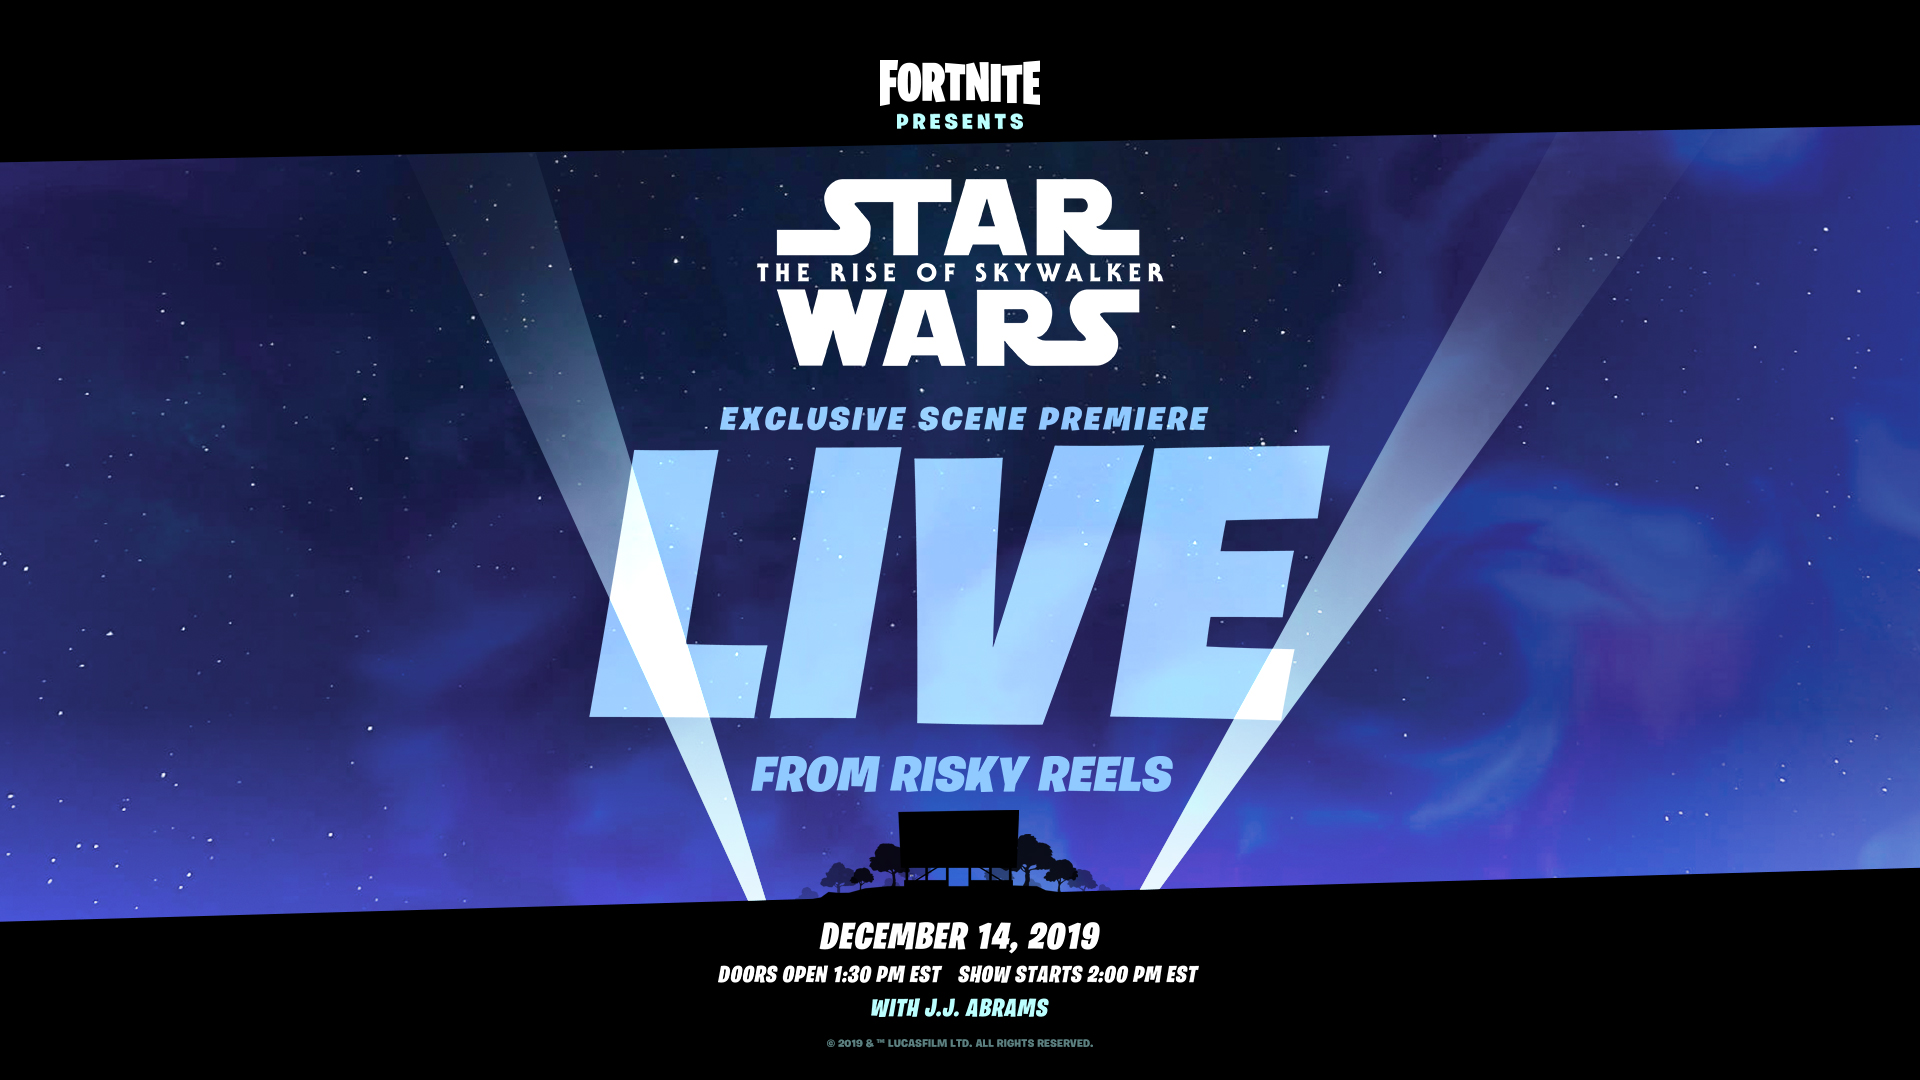 'Fortnite' 'Star Wars The Rise of Skywalker' Live Event Countdown